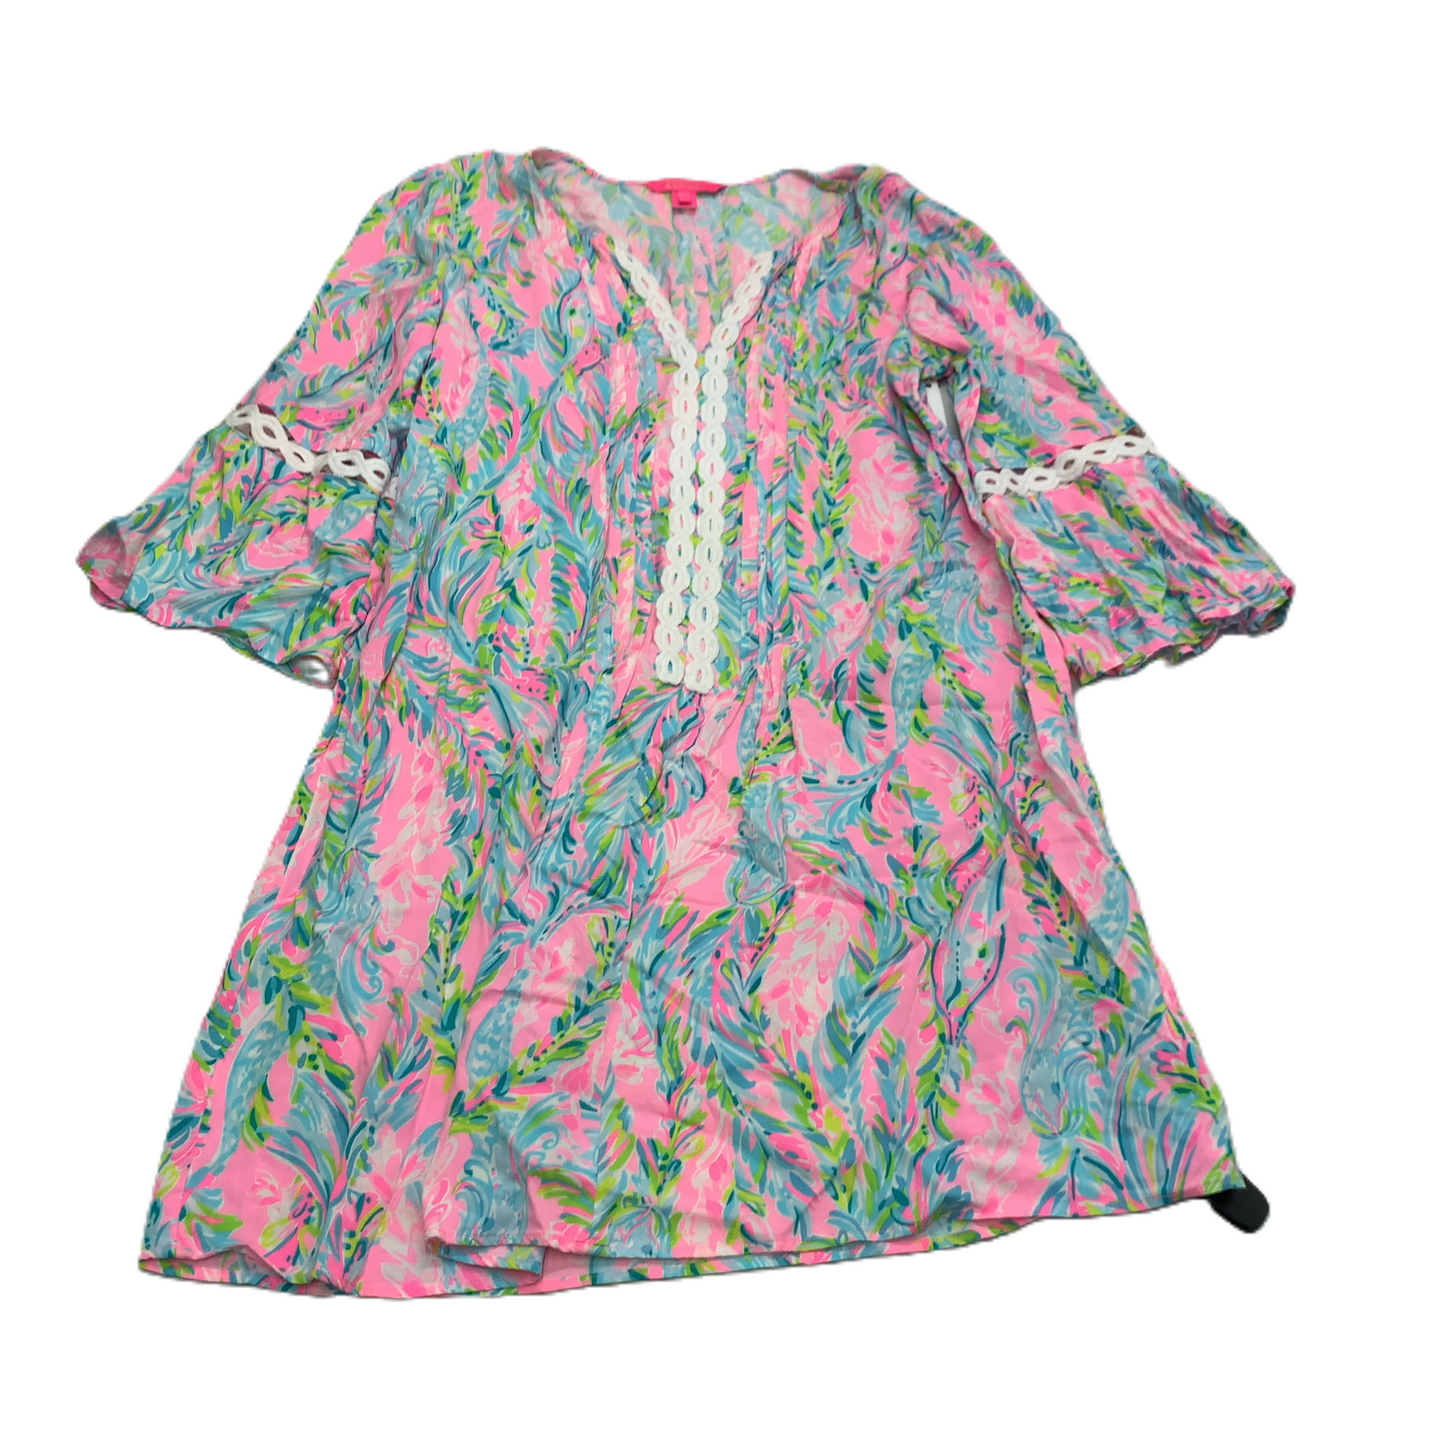 Blue & Pink  Dress Designer By Lilly Pulitzer  Size: M